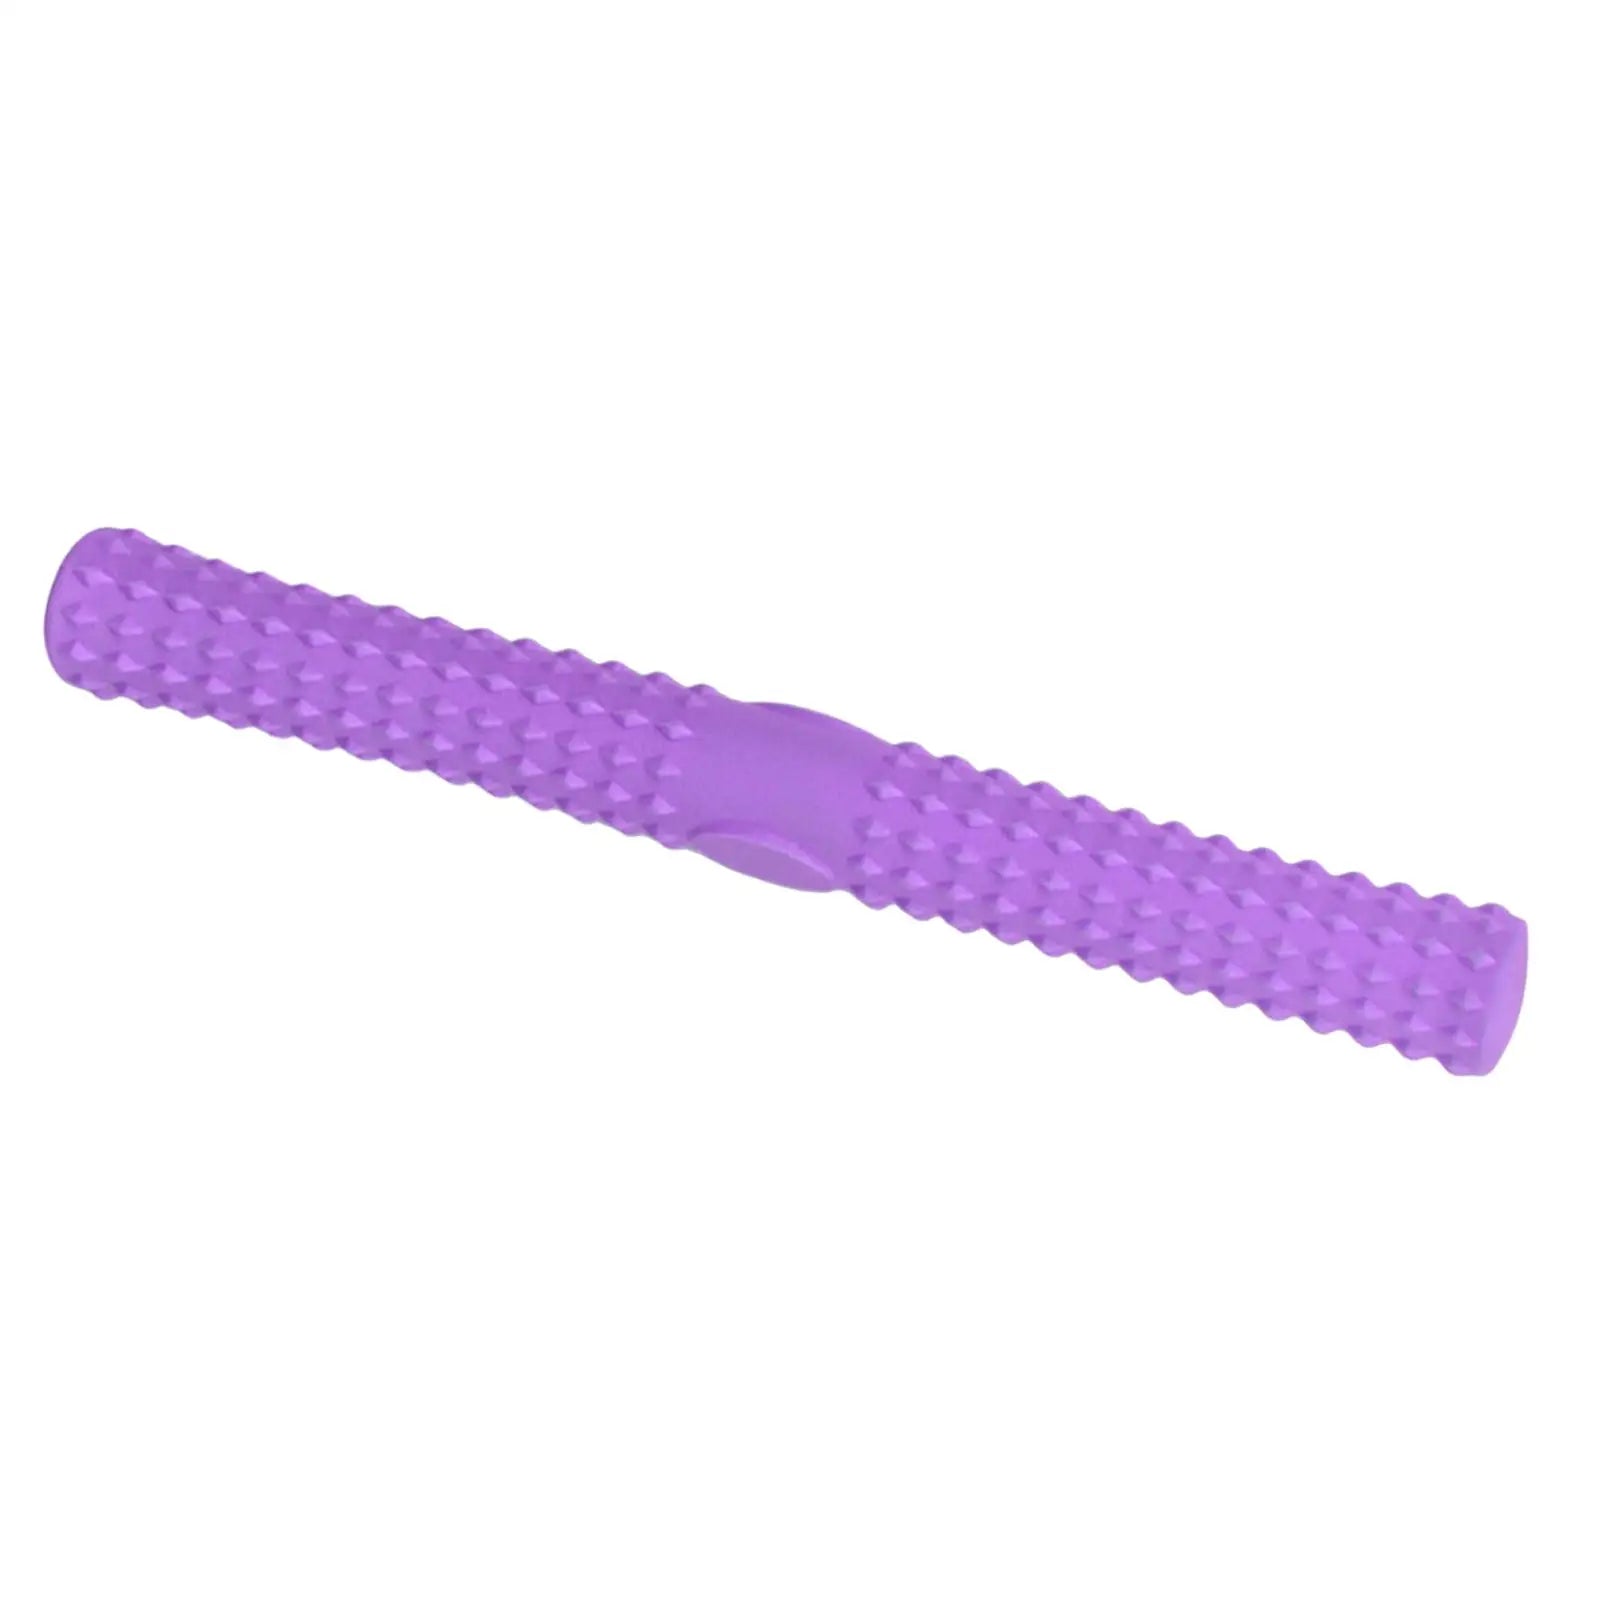 Twist Exerciser Bars Exercise Equipment Muscle Roller Tool